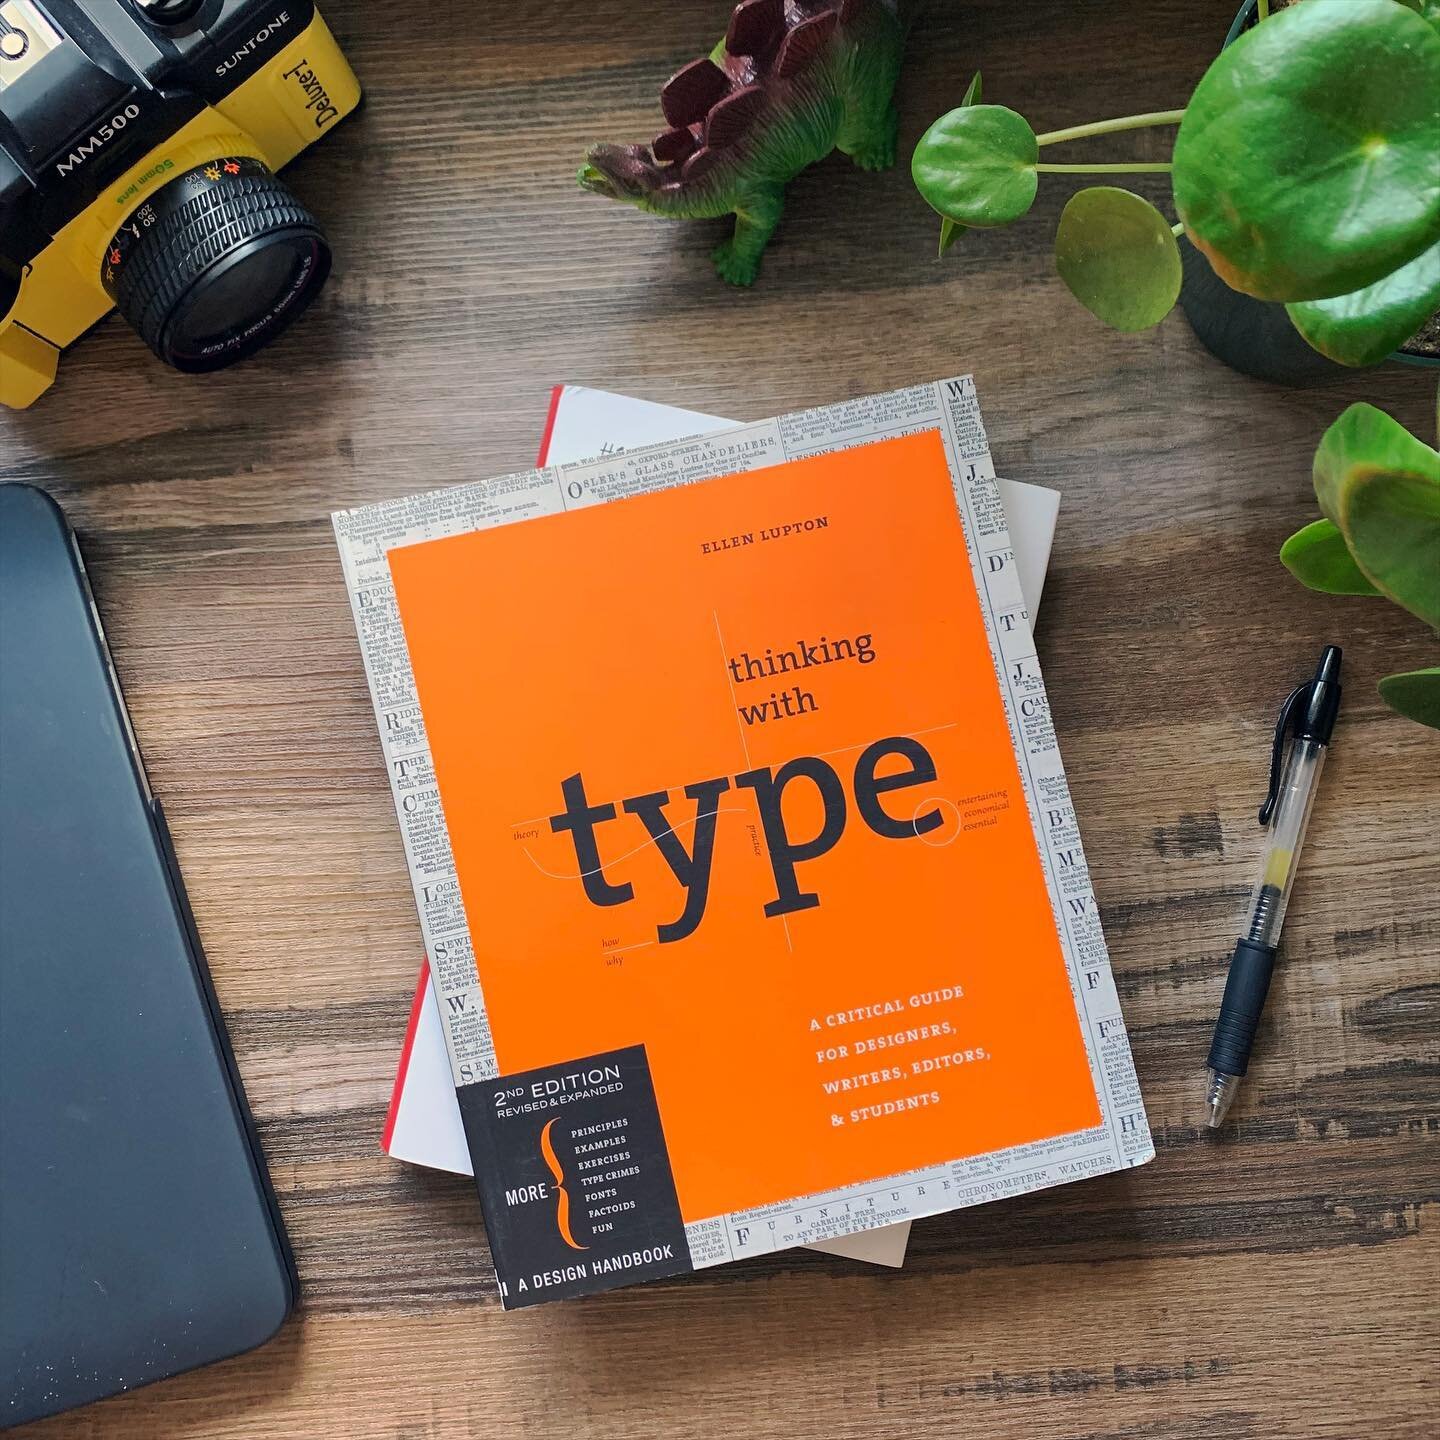 🎶 What&rsquo;s this person reading right now 🎶 

Thinking With Type by Ellen Lupton

You can&rsquo;t have good design with bad typography. Designers, if you&rsquo;re interested in learning more about type I highly recommend this book!

Buuuuut 